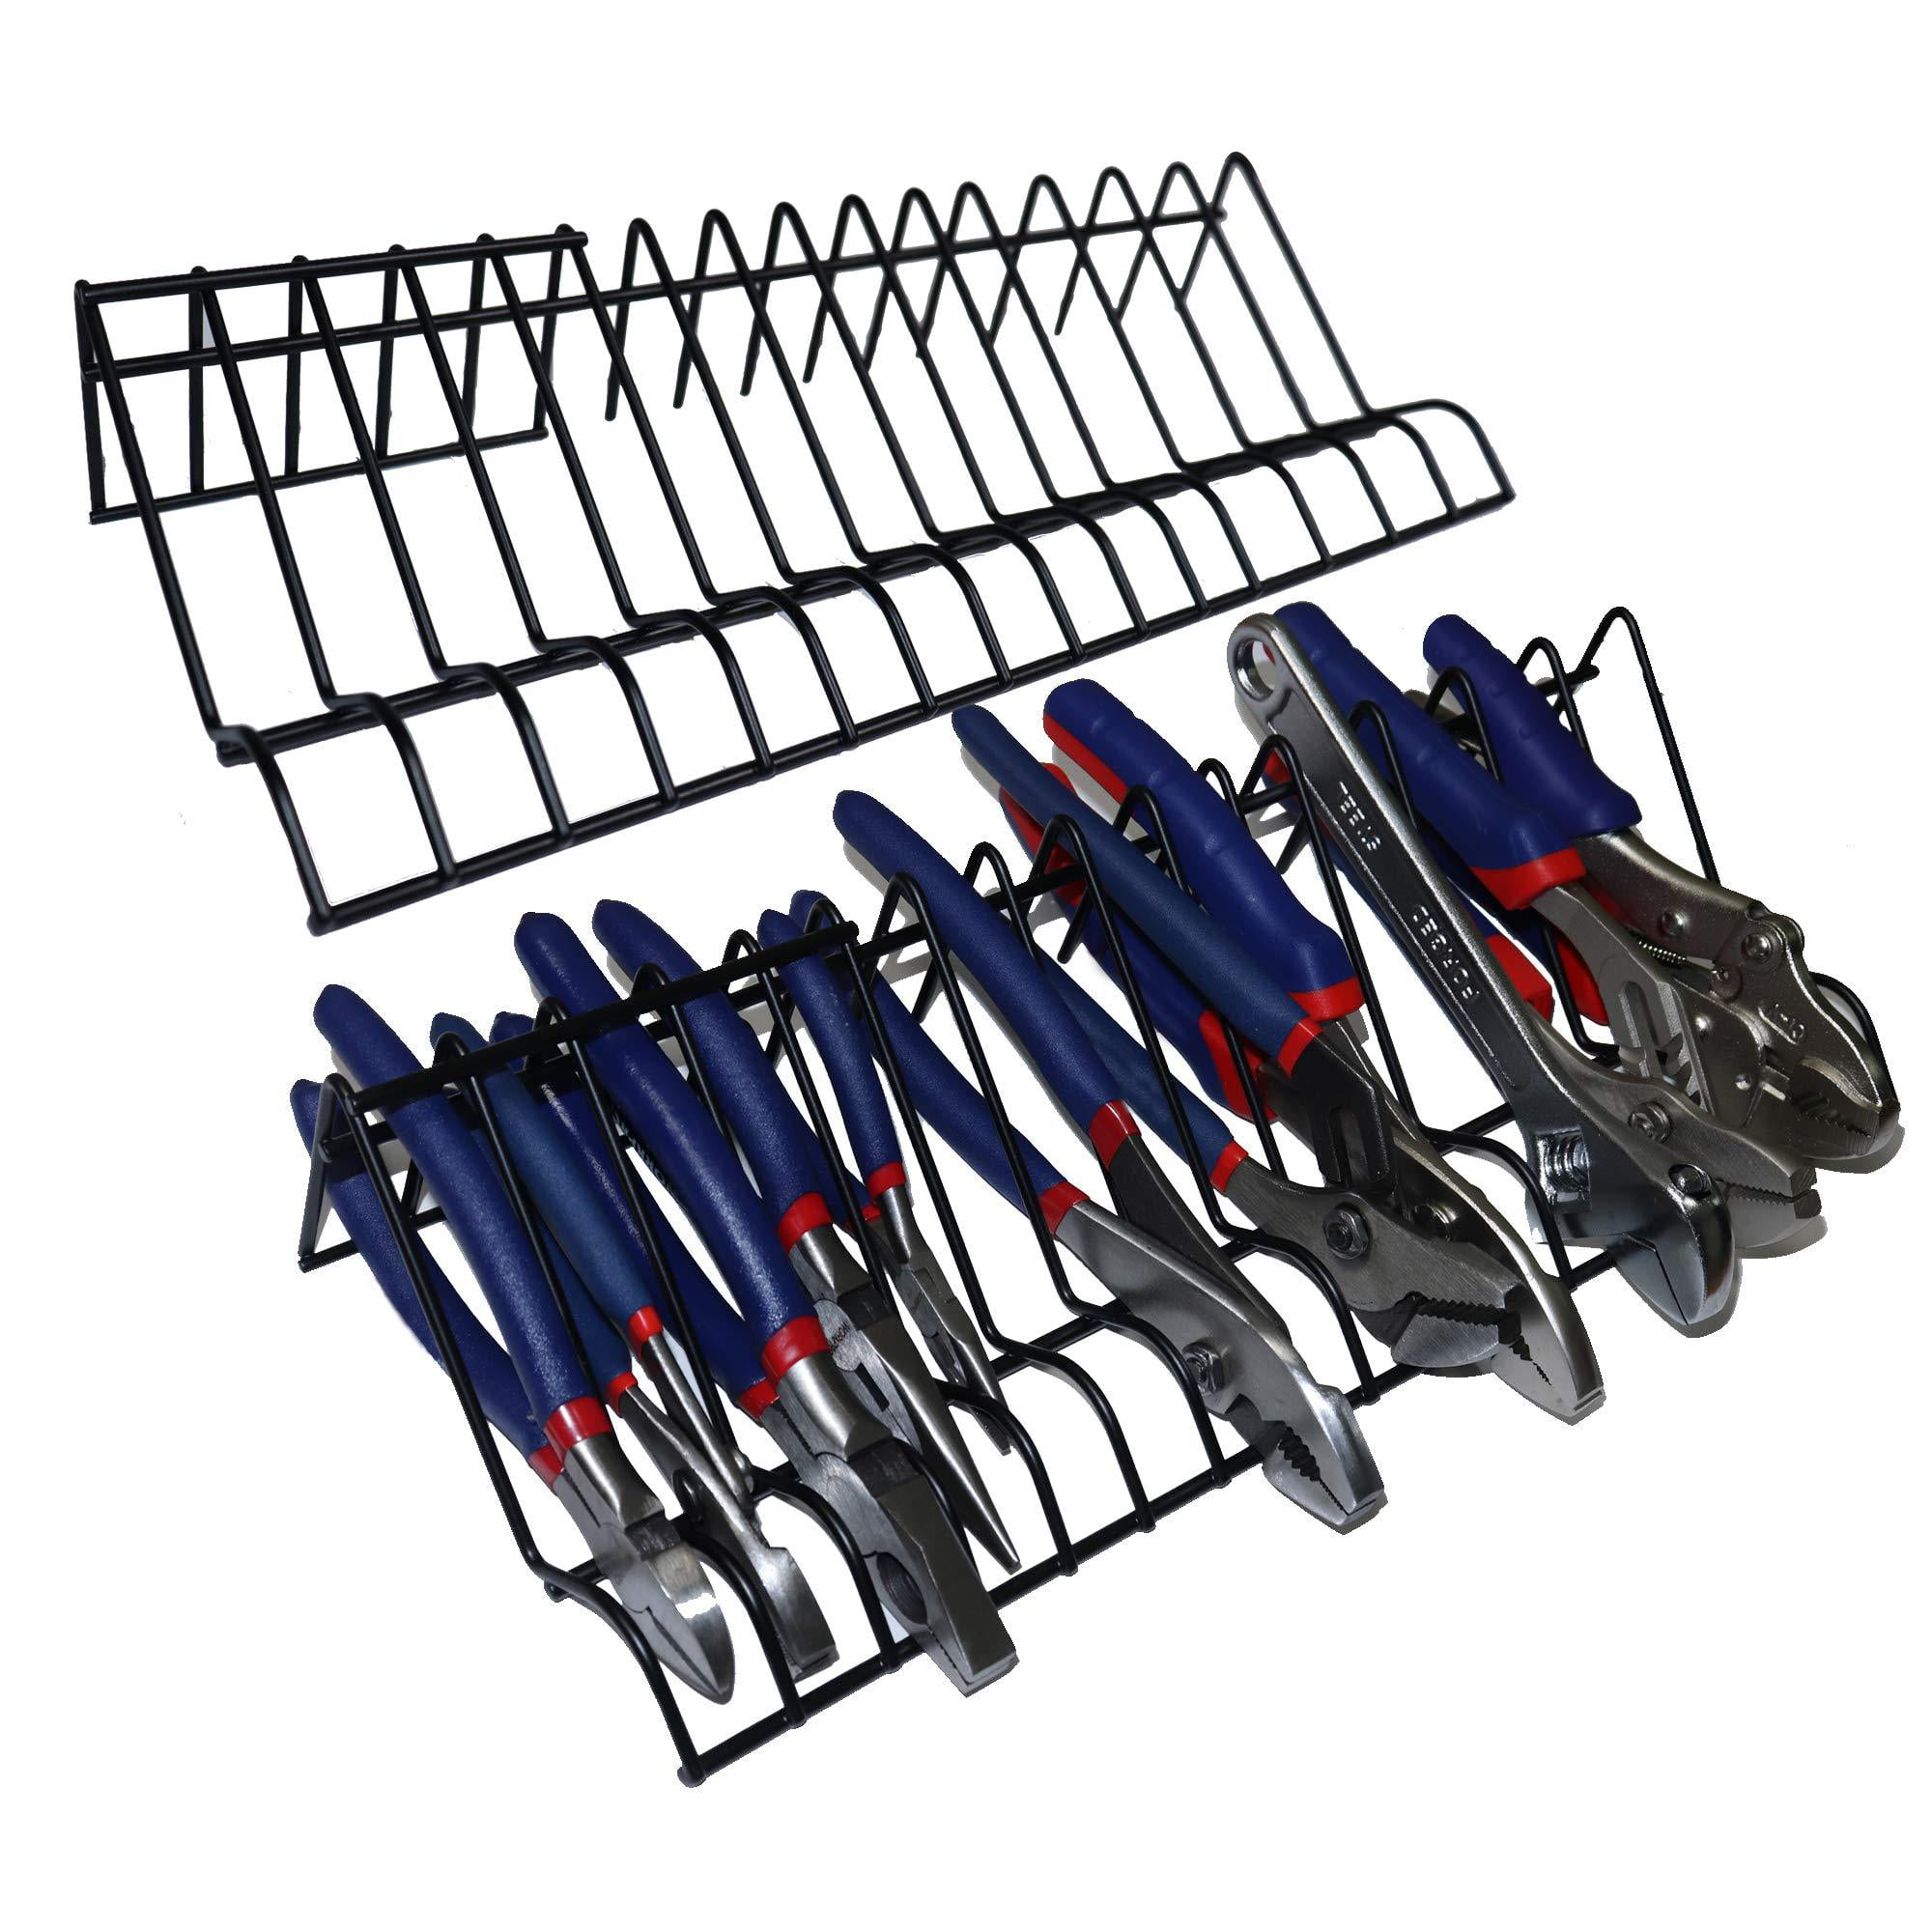 Mamilo Plier Organizer Rack Pack of 2 Regular and Wide Handle Insulated Pliers Stores Spring Loaded 2 Pack Tool Box Storage and Organization Holder Fits Nicely in Your Toolbox 